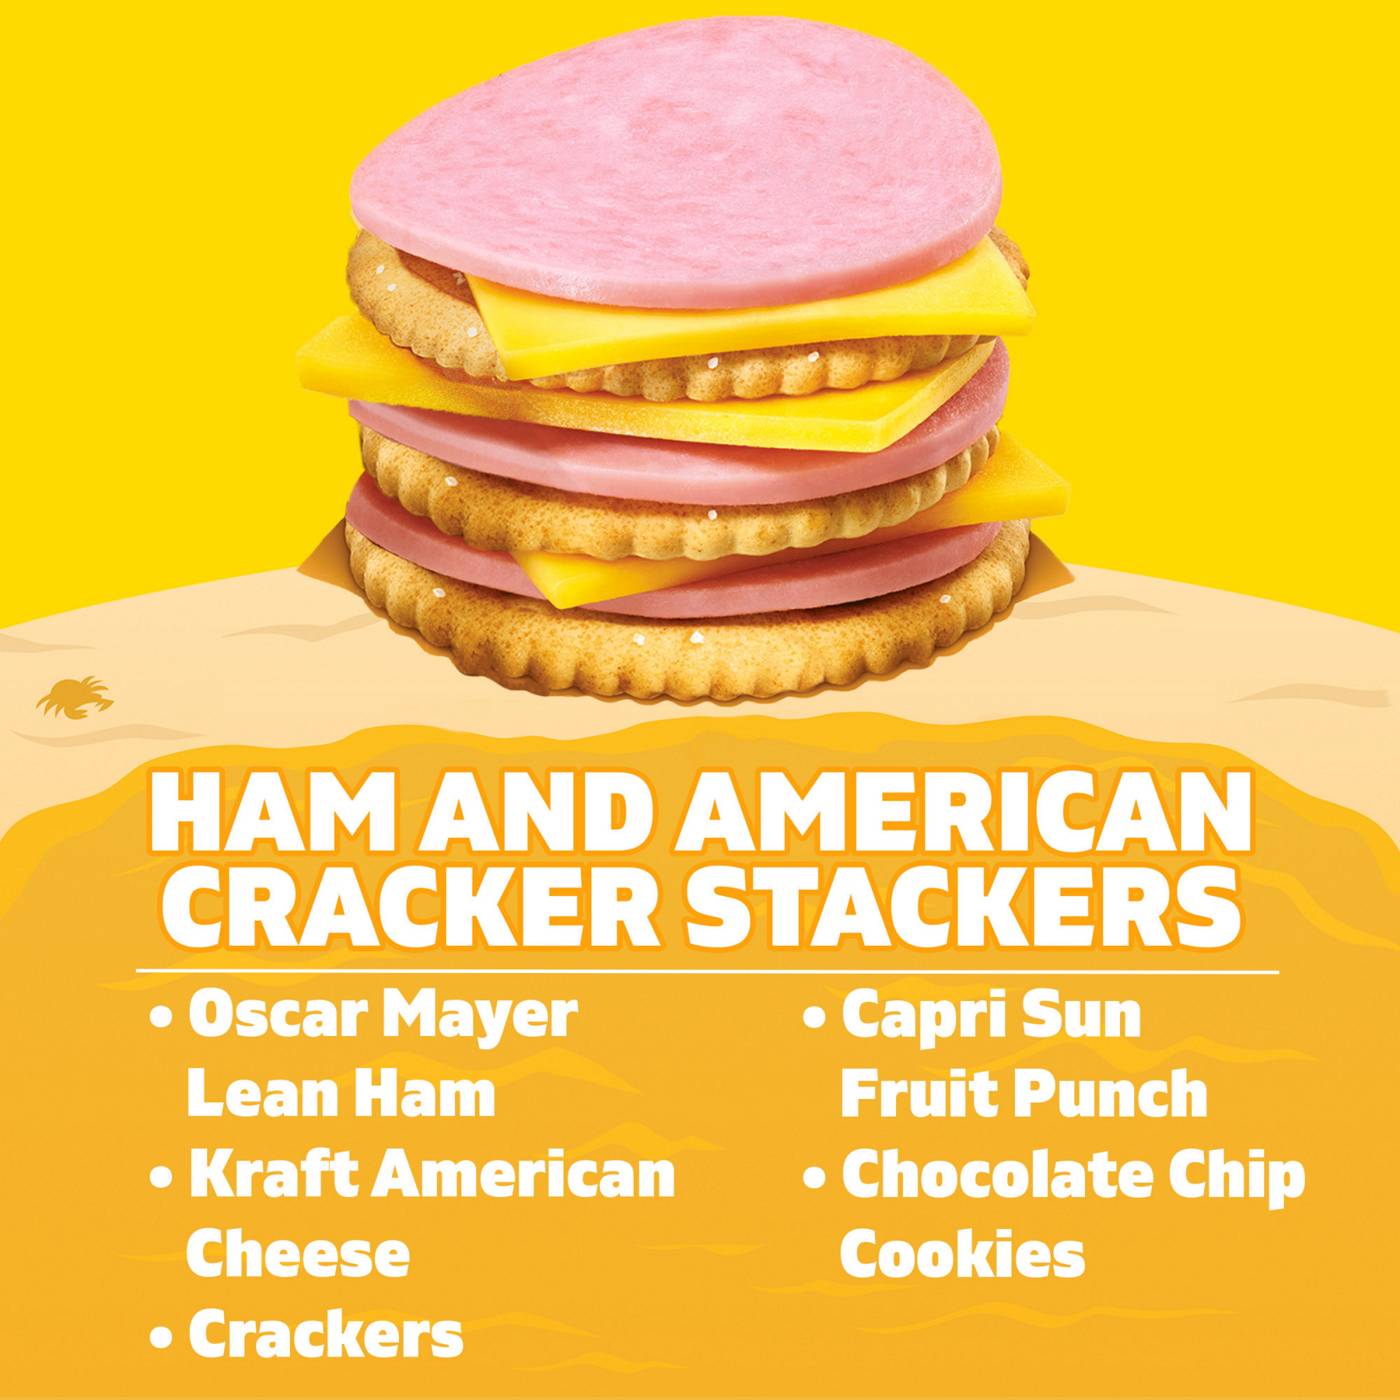 Lunchables Snack Kit Tray - Ham & American Cracker Stackers, Capri Sun & Cookie; image 6 of 6